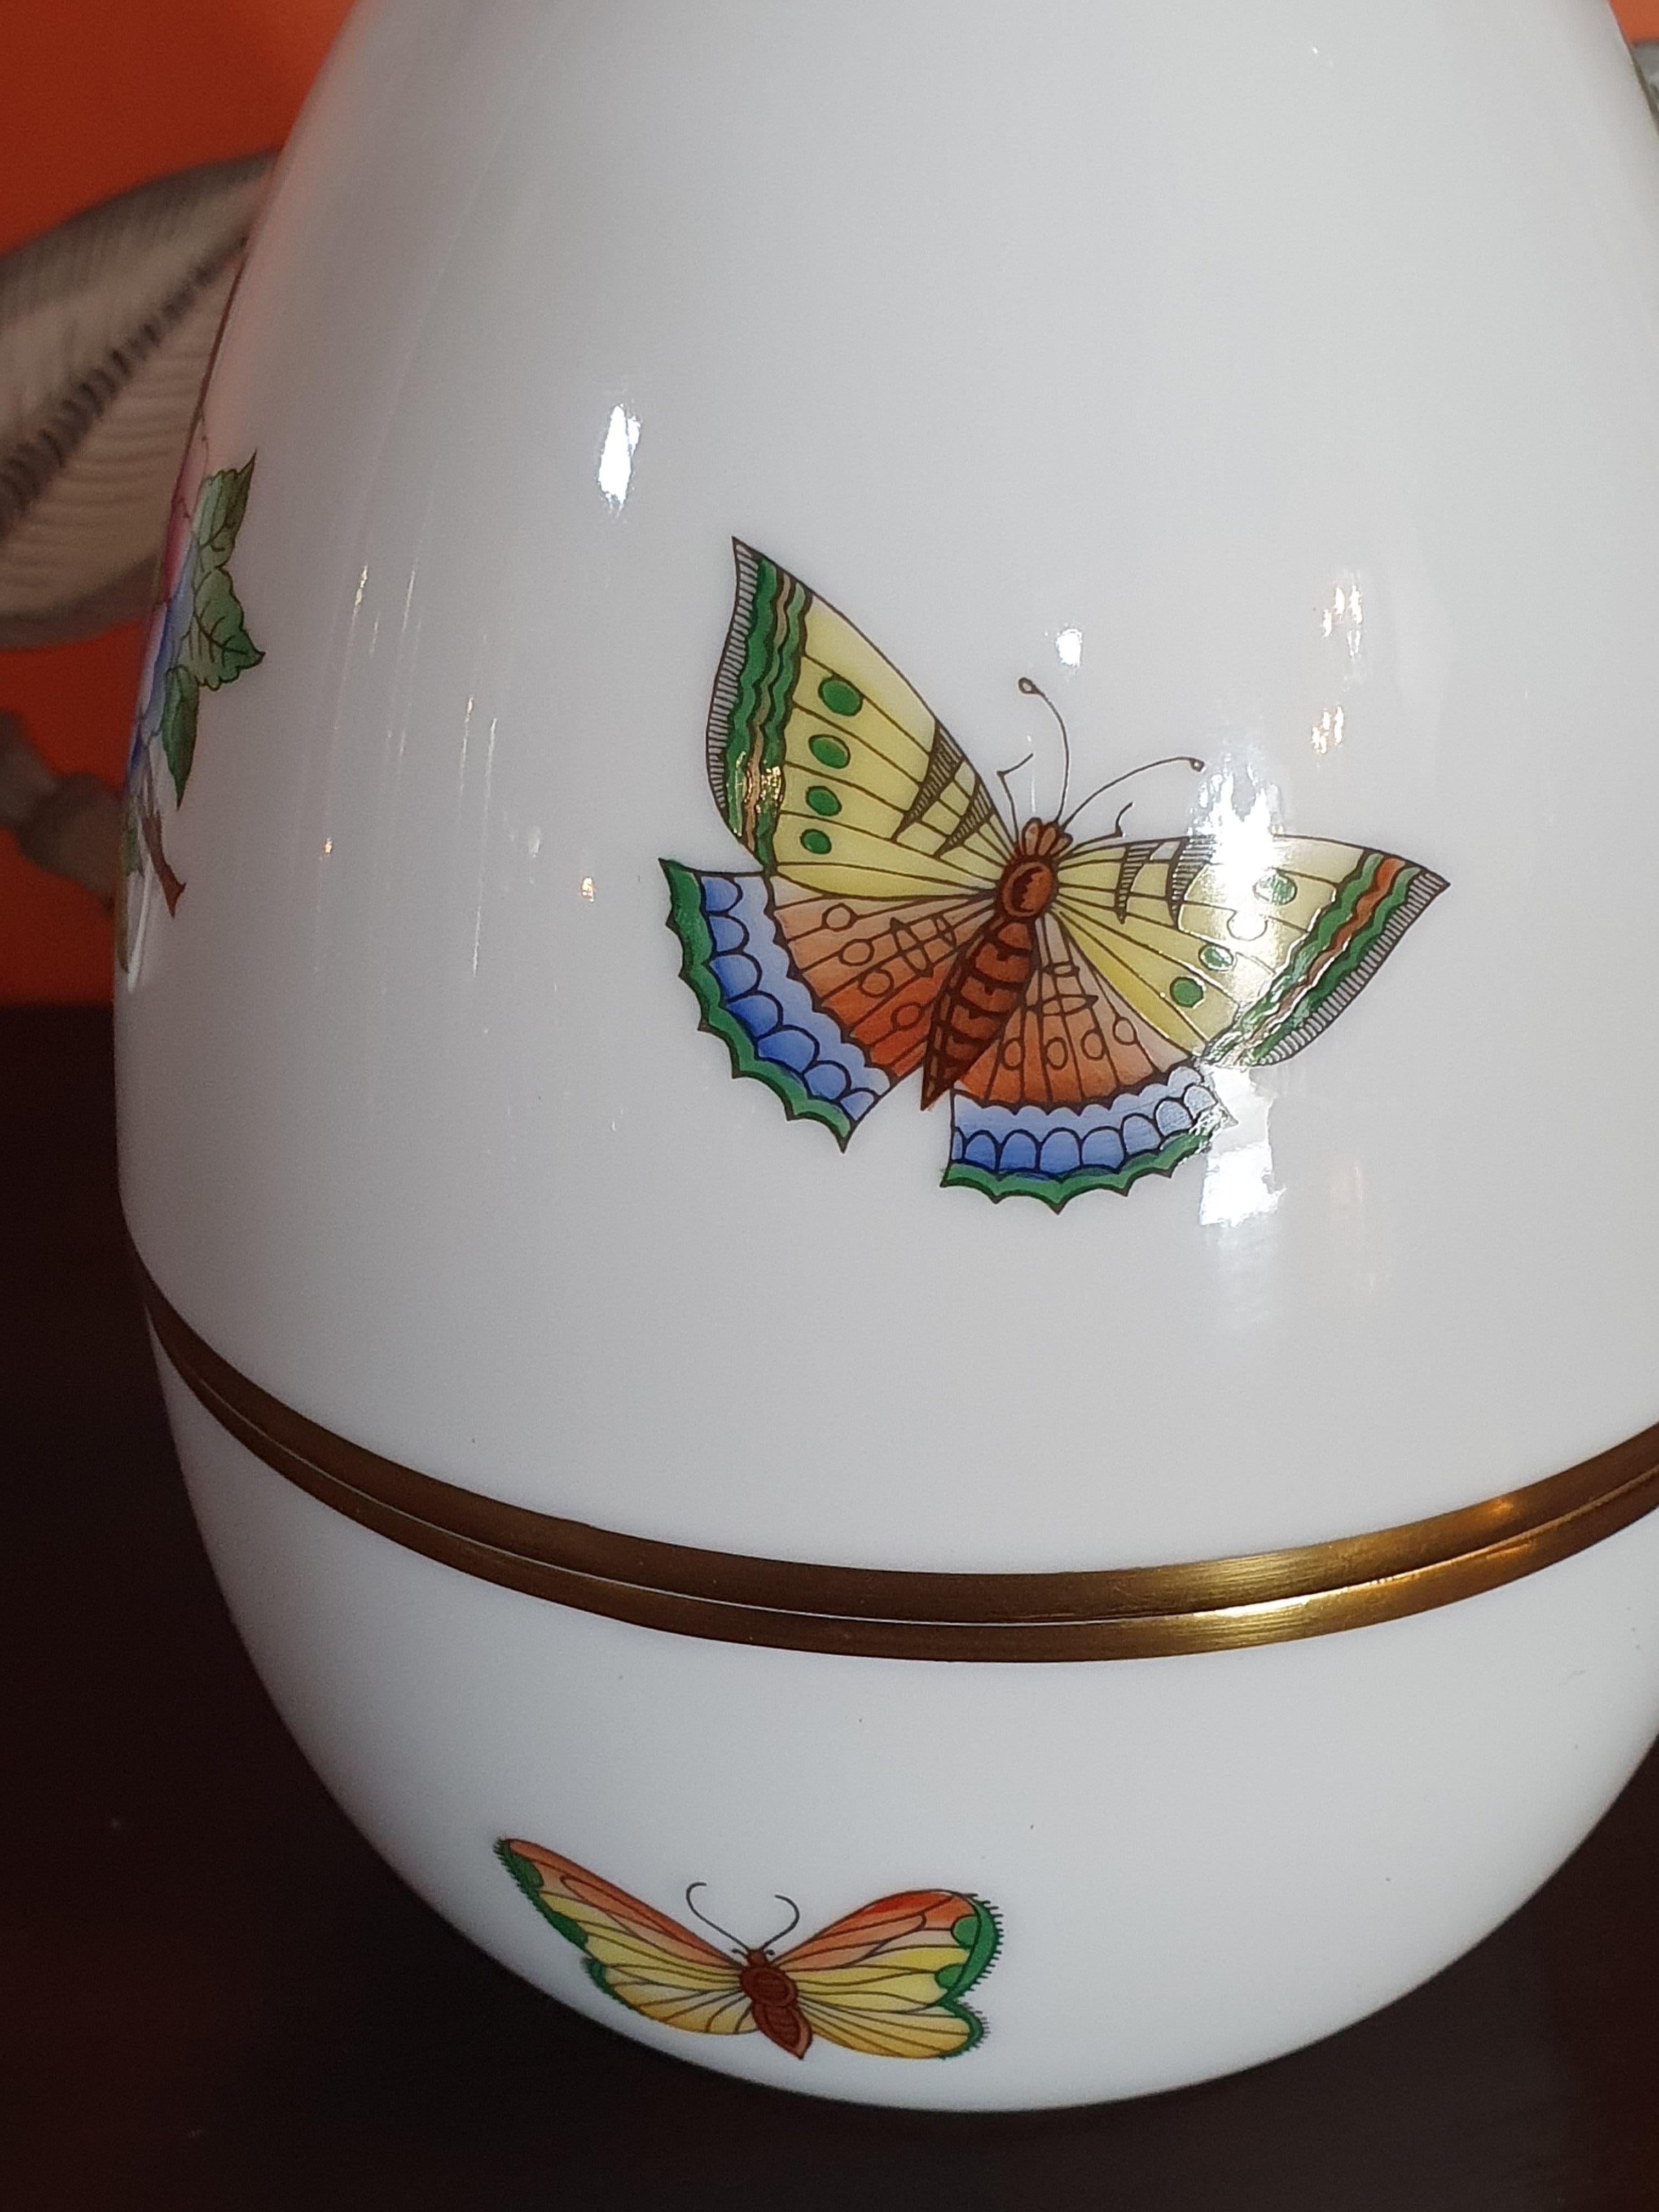 Stylish egg shaped box in Hungarian porcelain hand painted with flowers and butterflies decoration, multi-color.
The Victoria decor is one of the most important of Herend since it was chosen by the great Queen Victoria in 1851 during the universal